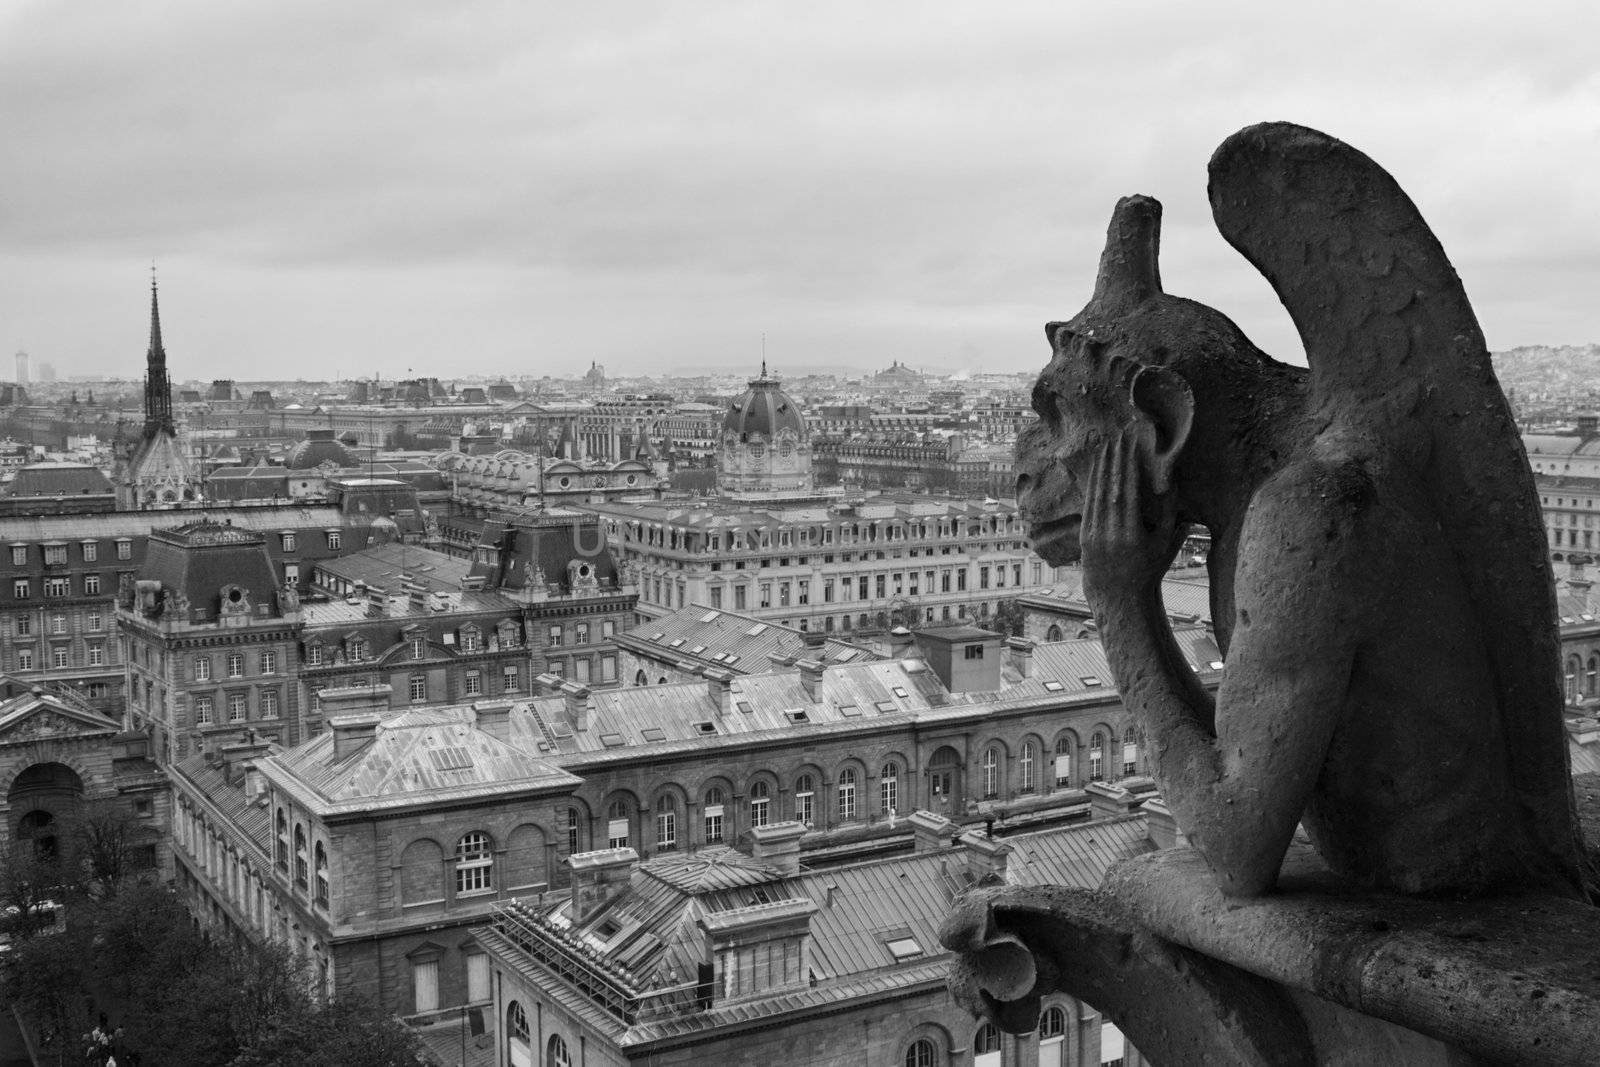 Gargoyle on Notre Dame overlooking Paris on a cloudy day